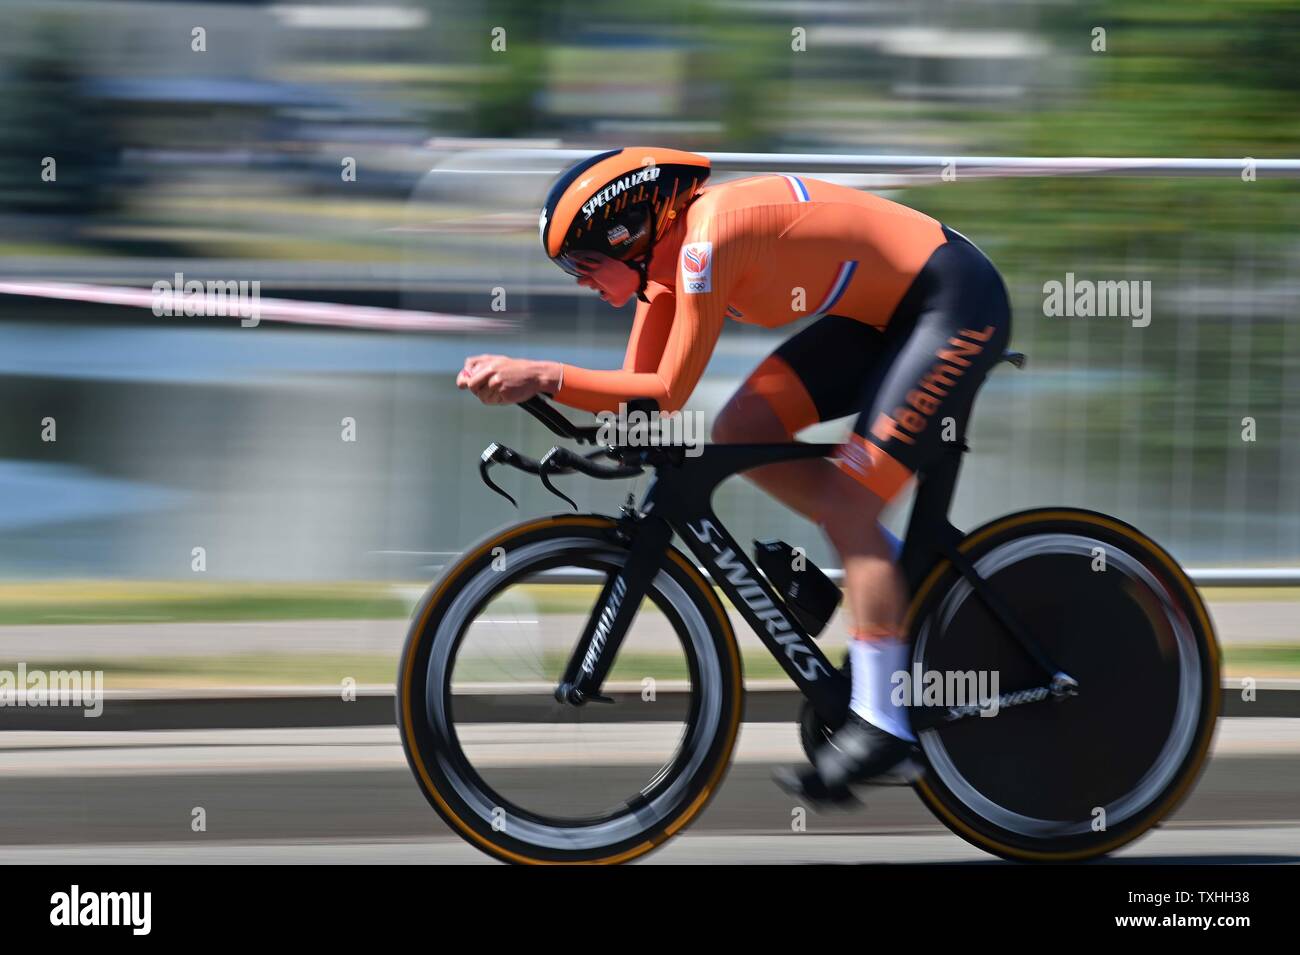 Minsk. Belarus. 25 June 2019. Chantal Blaak (NED) in the cycling time trial at the 2nd European games. Credit: Sport In Pictures/Alamy Live News Stock Photo